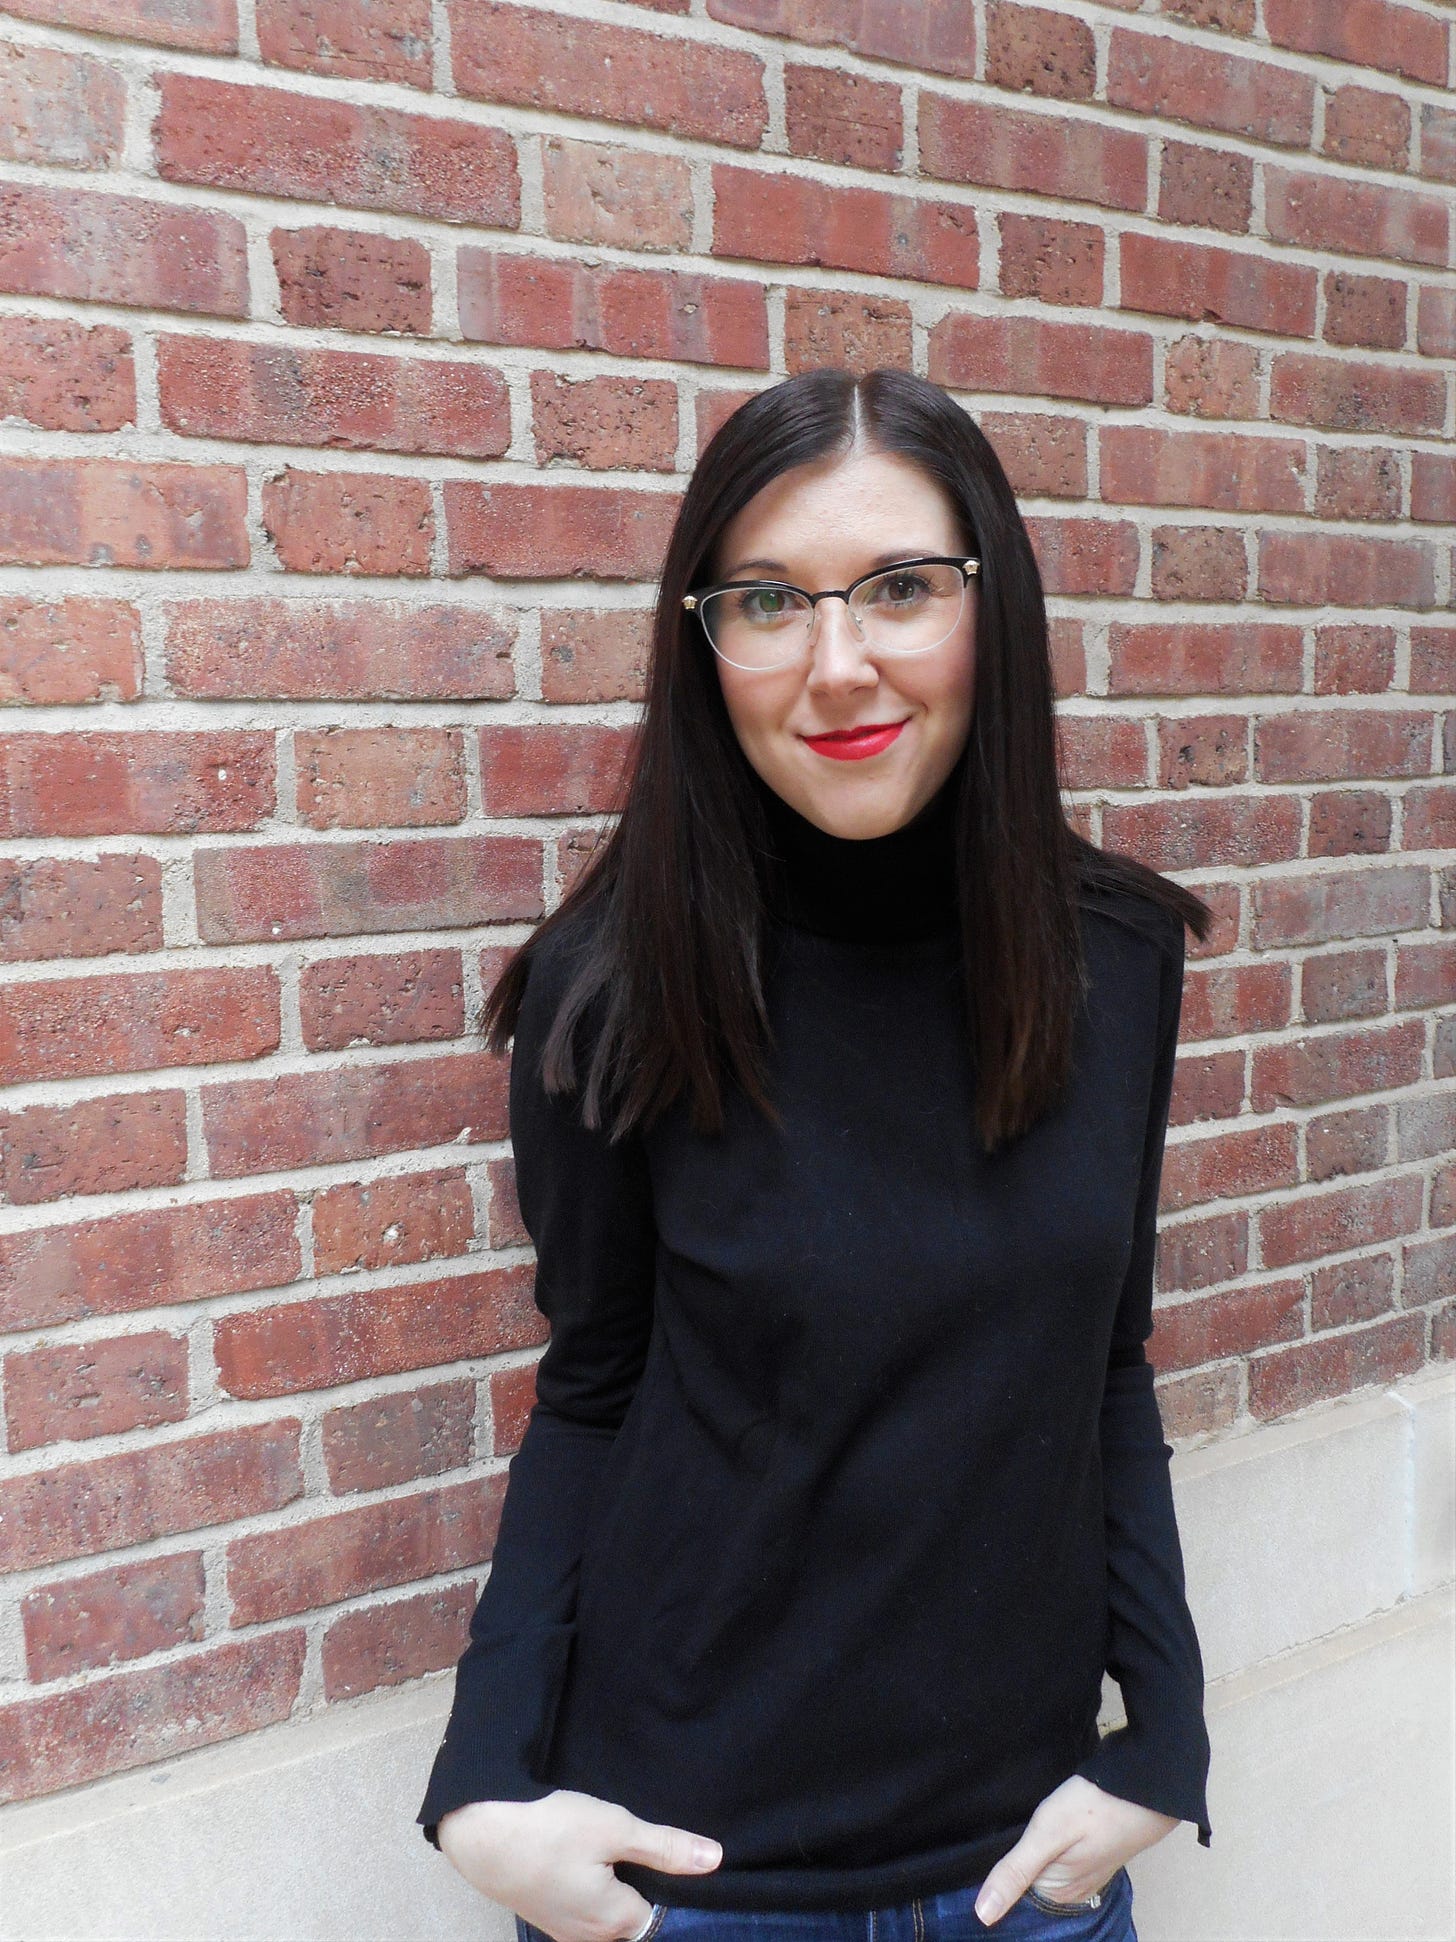 Photo of author Sarah Fawn Montgomery from the hips up, standing in front of a brick wall and wearing a long-sleeve black shirt and glasses.